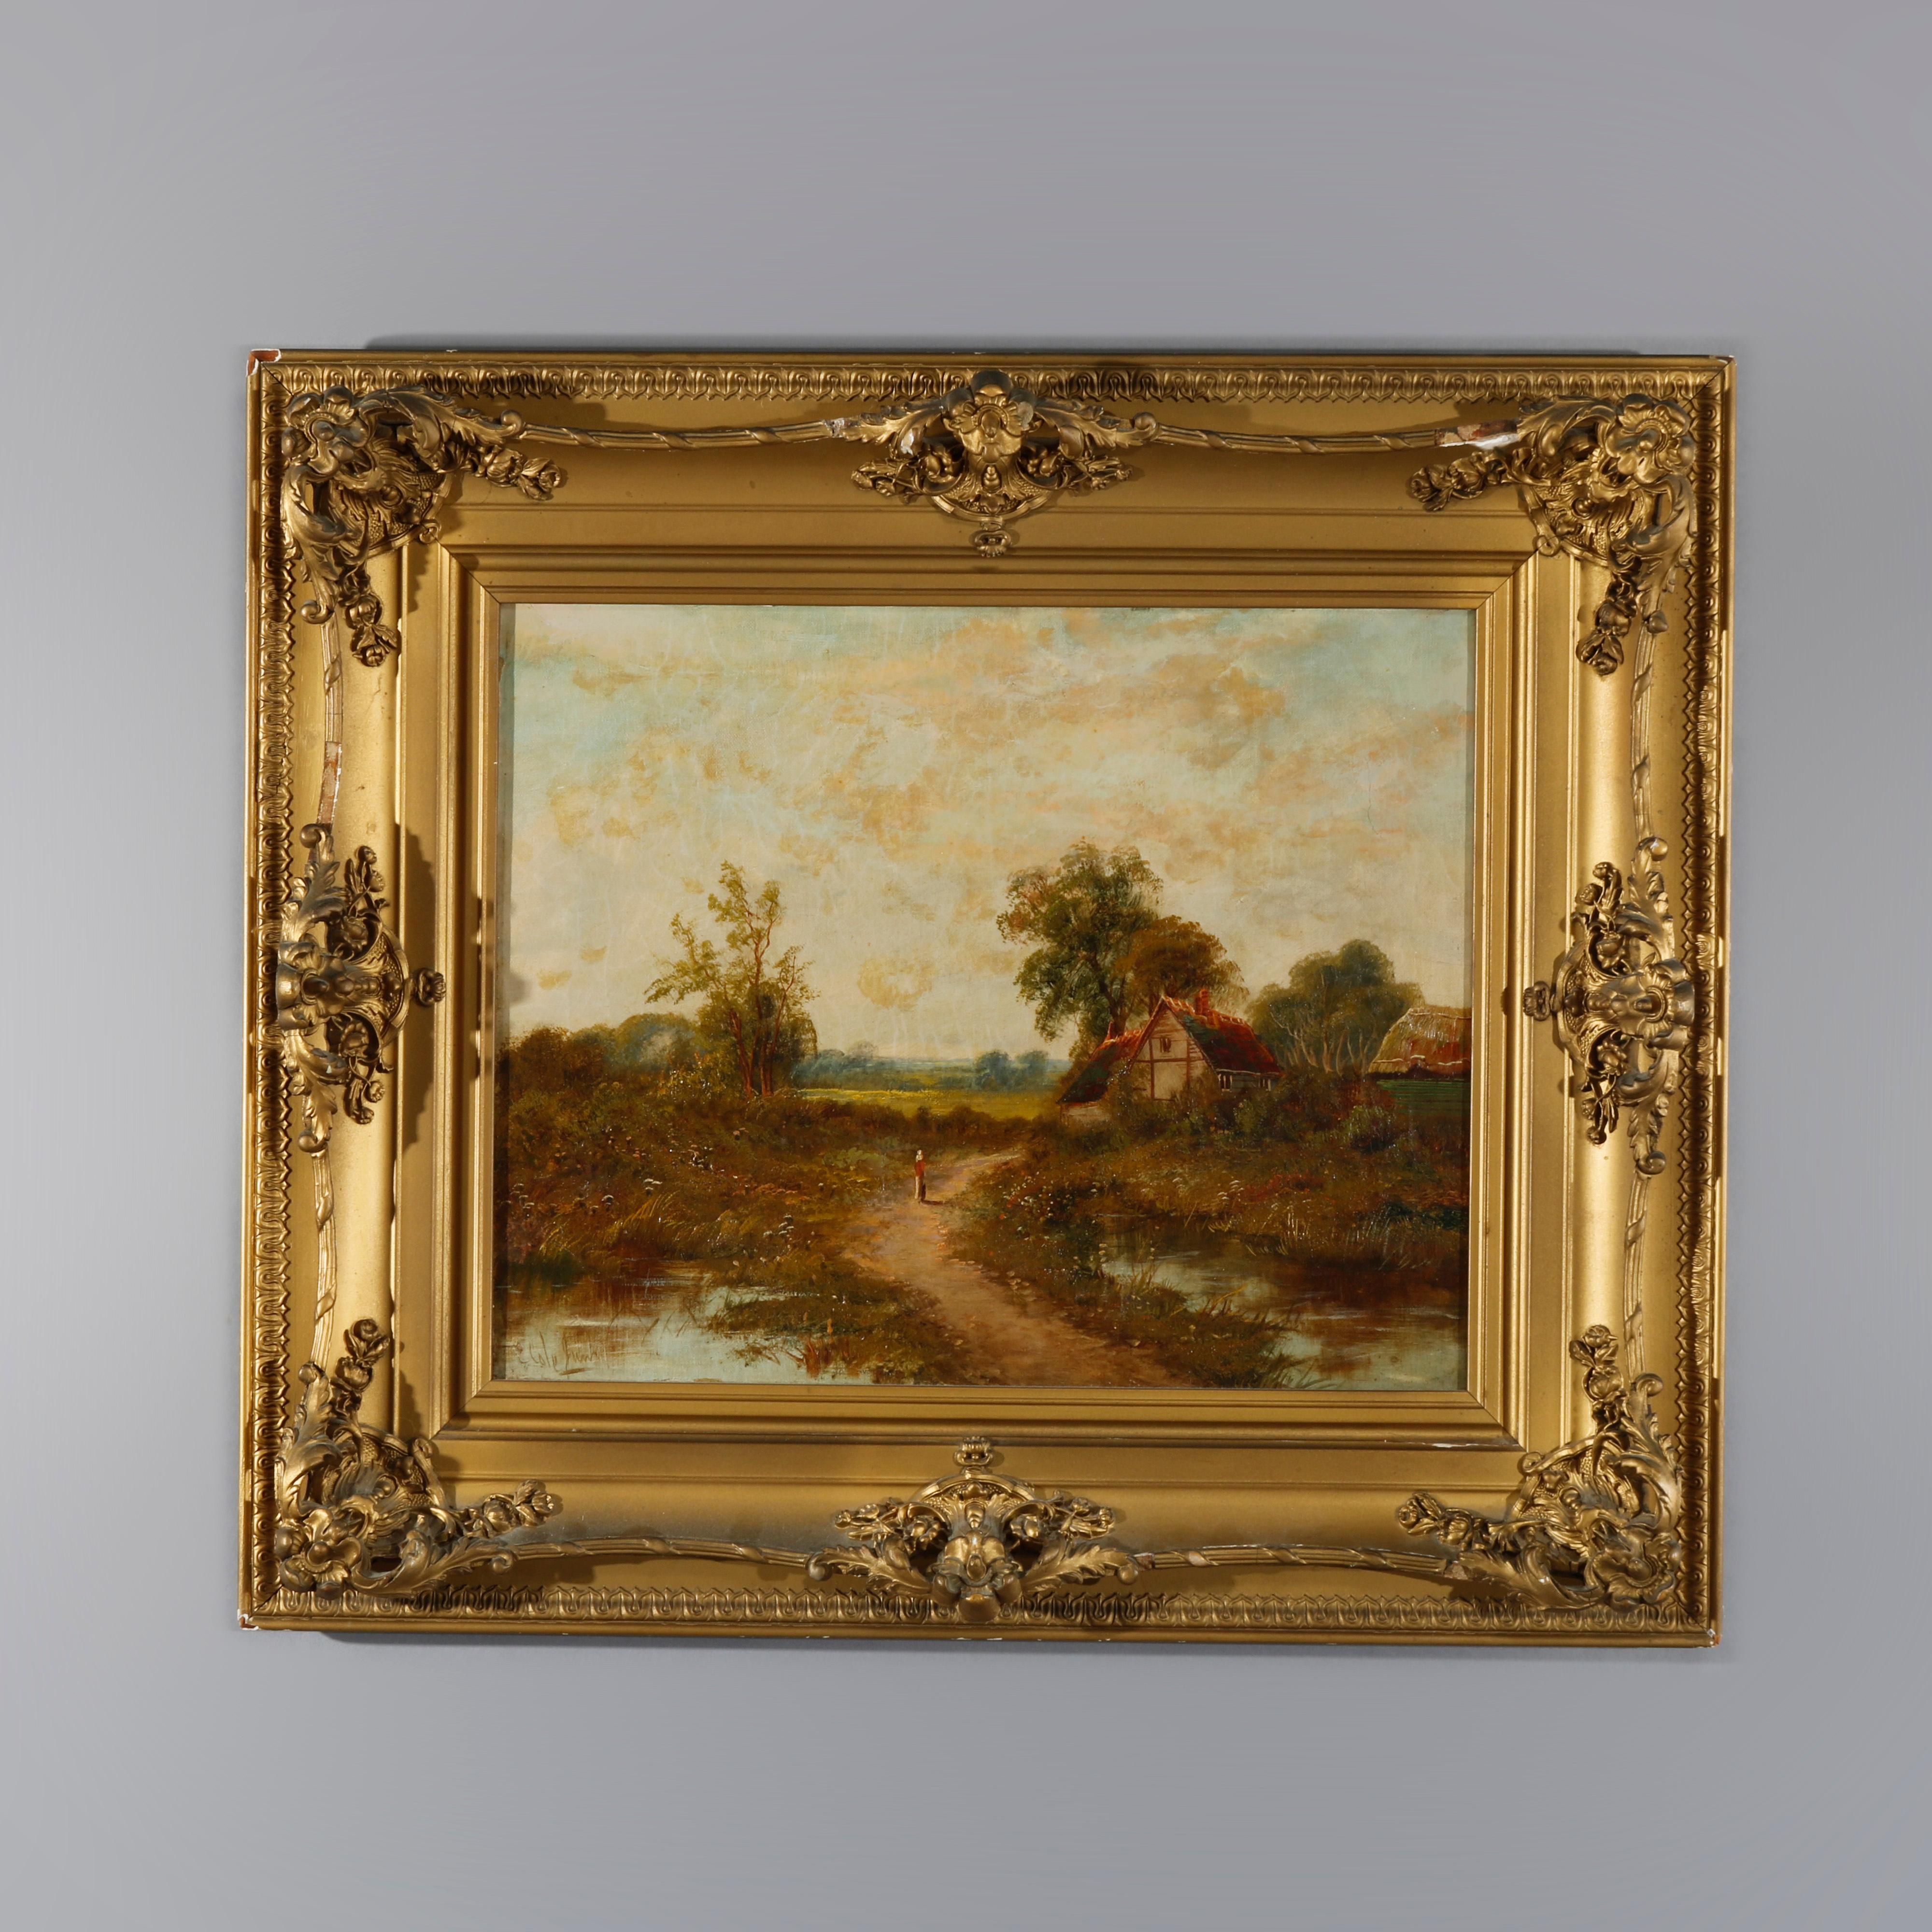 An antique Continental painting offers oil on canvas landscape scene by E. Cole with lake, cottage and figure on a path, artist signed lower left, seated in giltwood frame, 19th century

Measures - overall 25.75'' H X 29.75'' W X 3.75'' D; sight